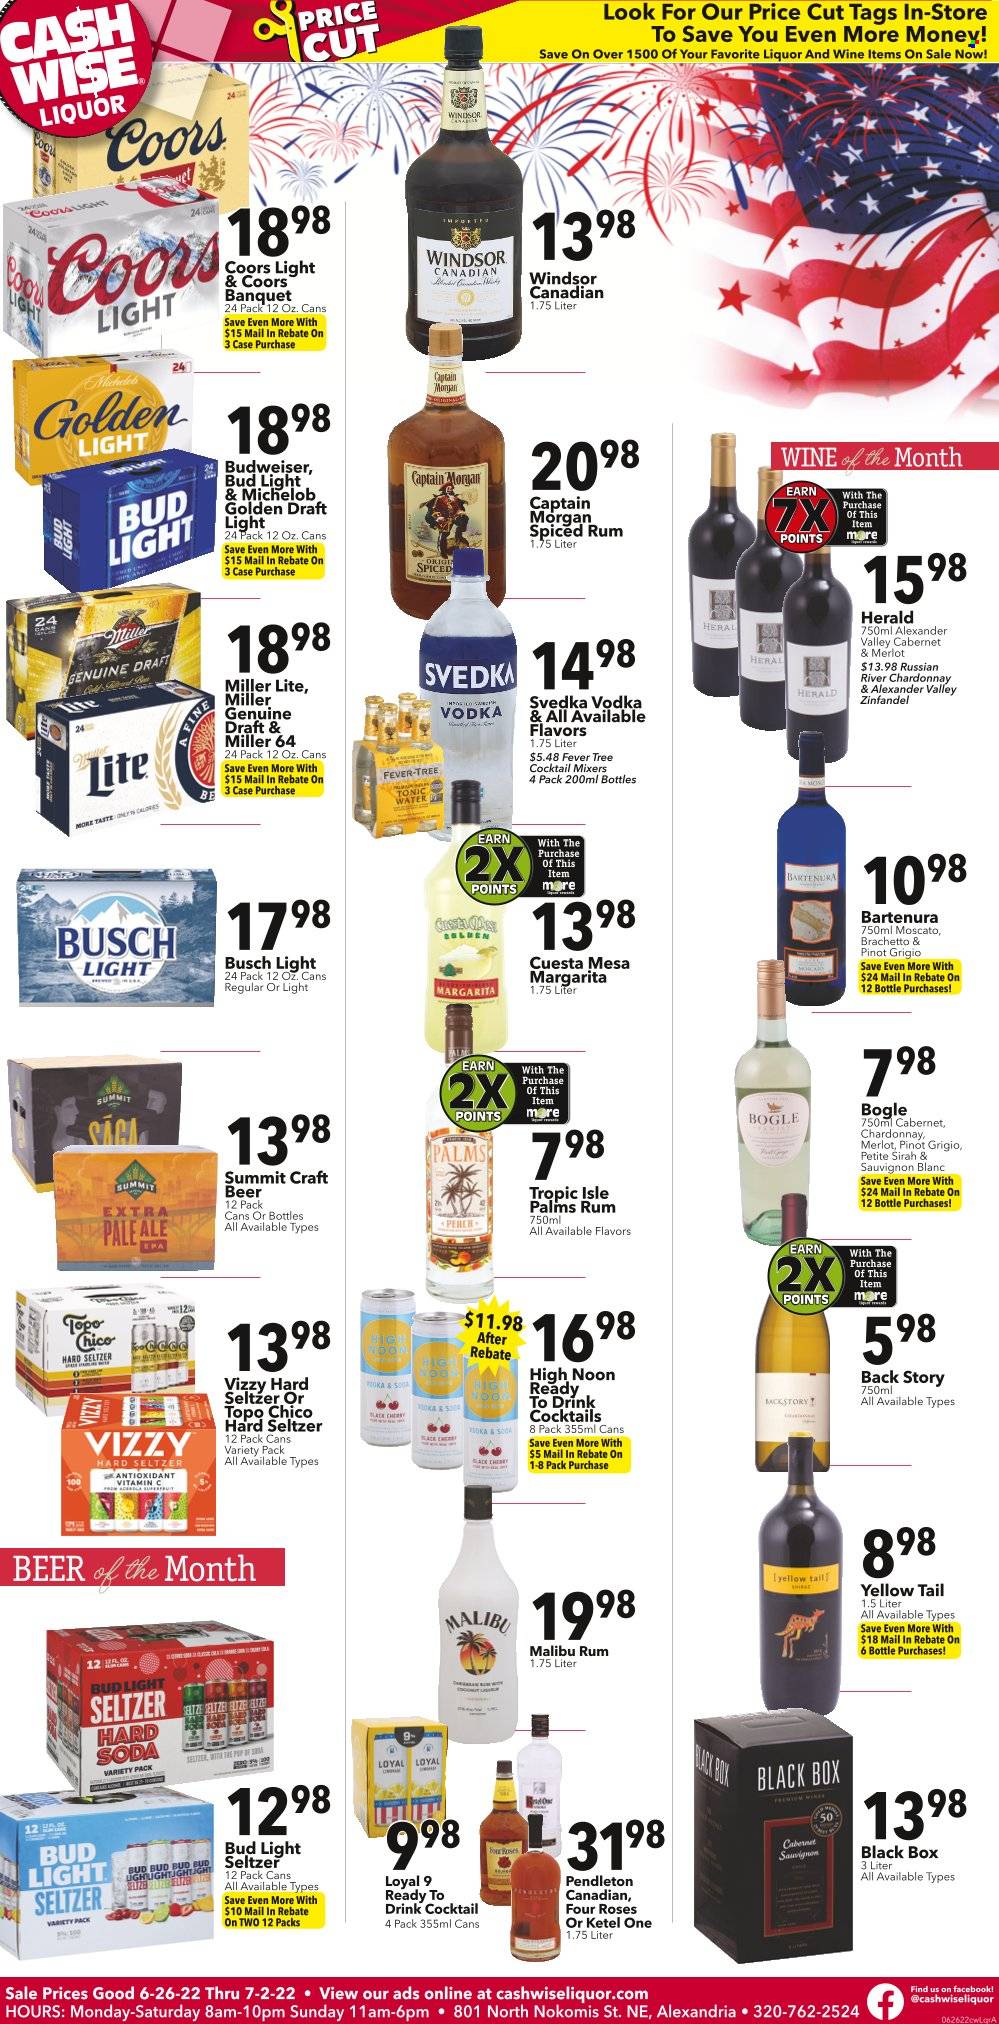 Cash Wise Liquor Only ad  - 06.26.2022 - 07.02.2022.